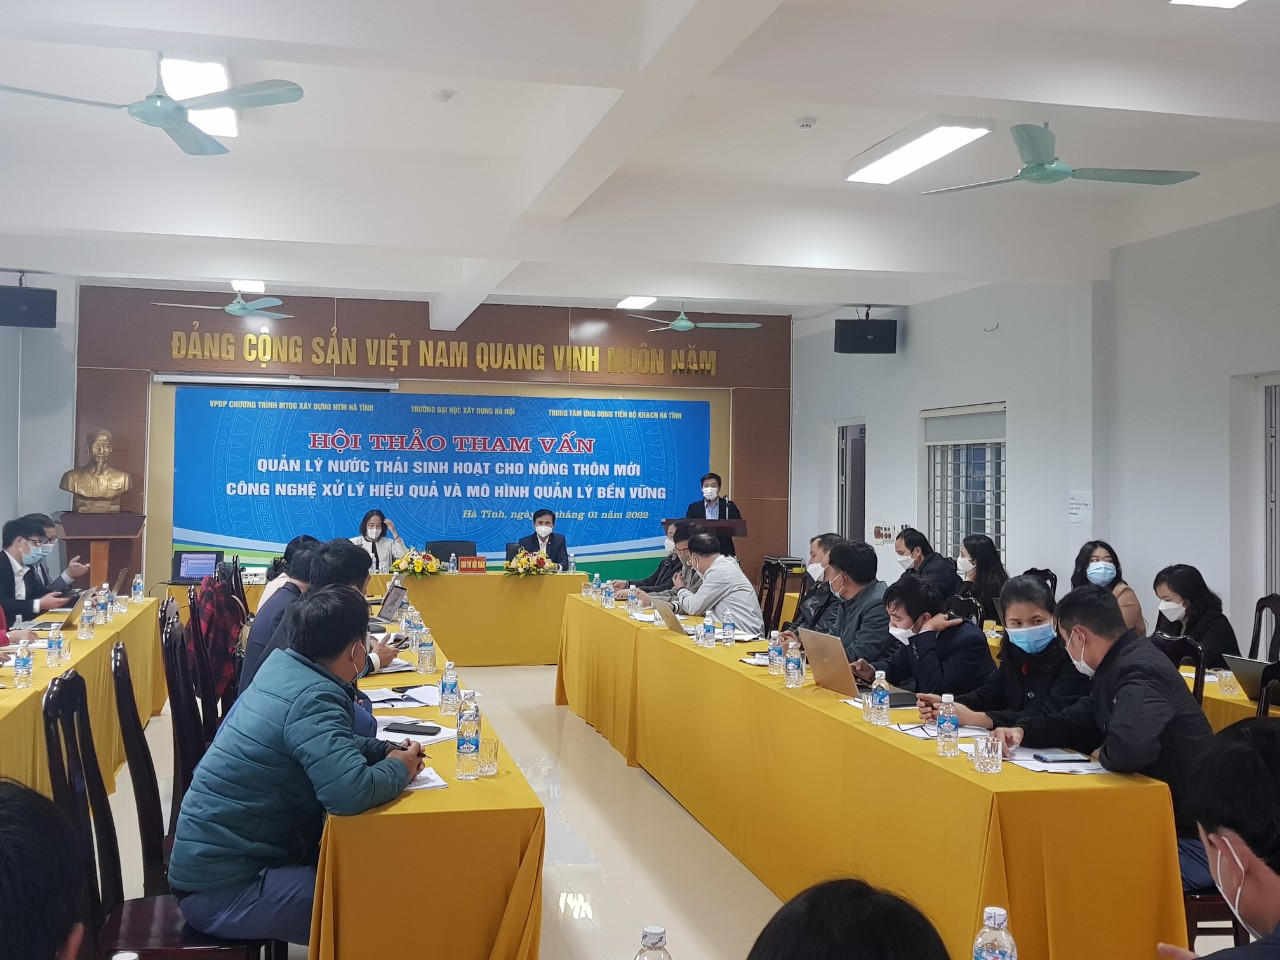 Hanoi University of Civil Engineering implementation of the scientific research program for new rural areas in the field of wastewater treatment